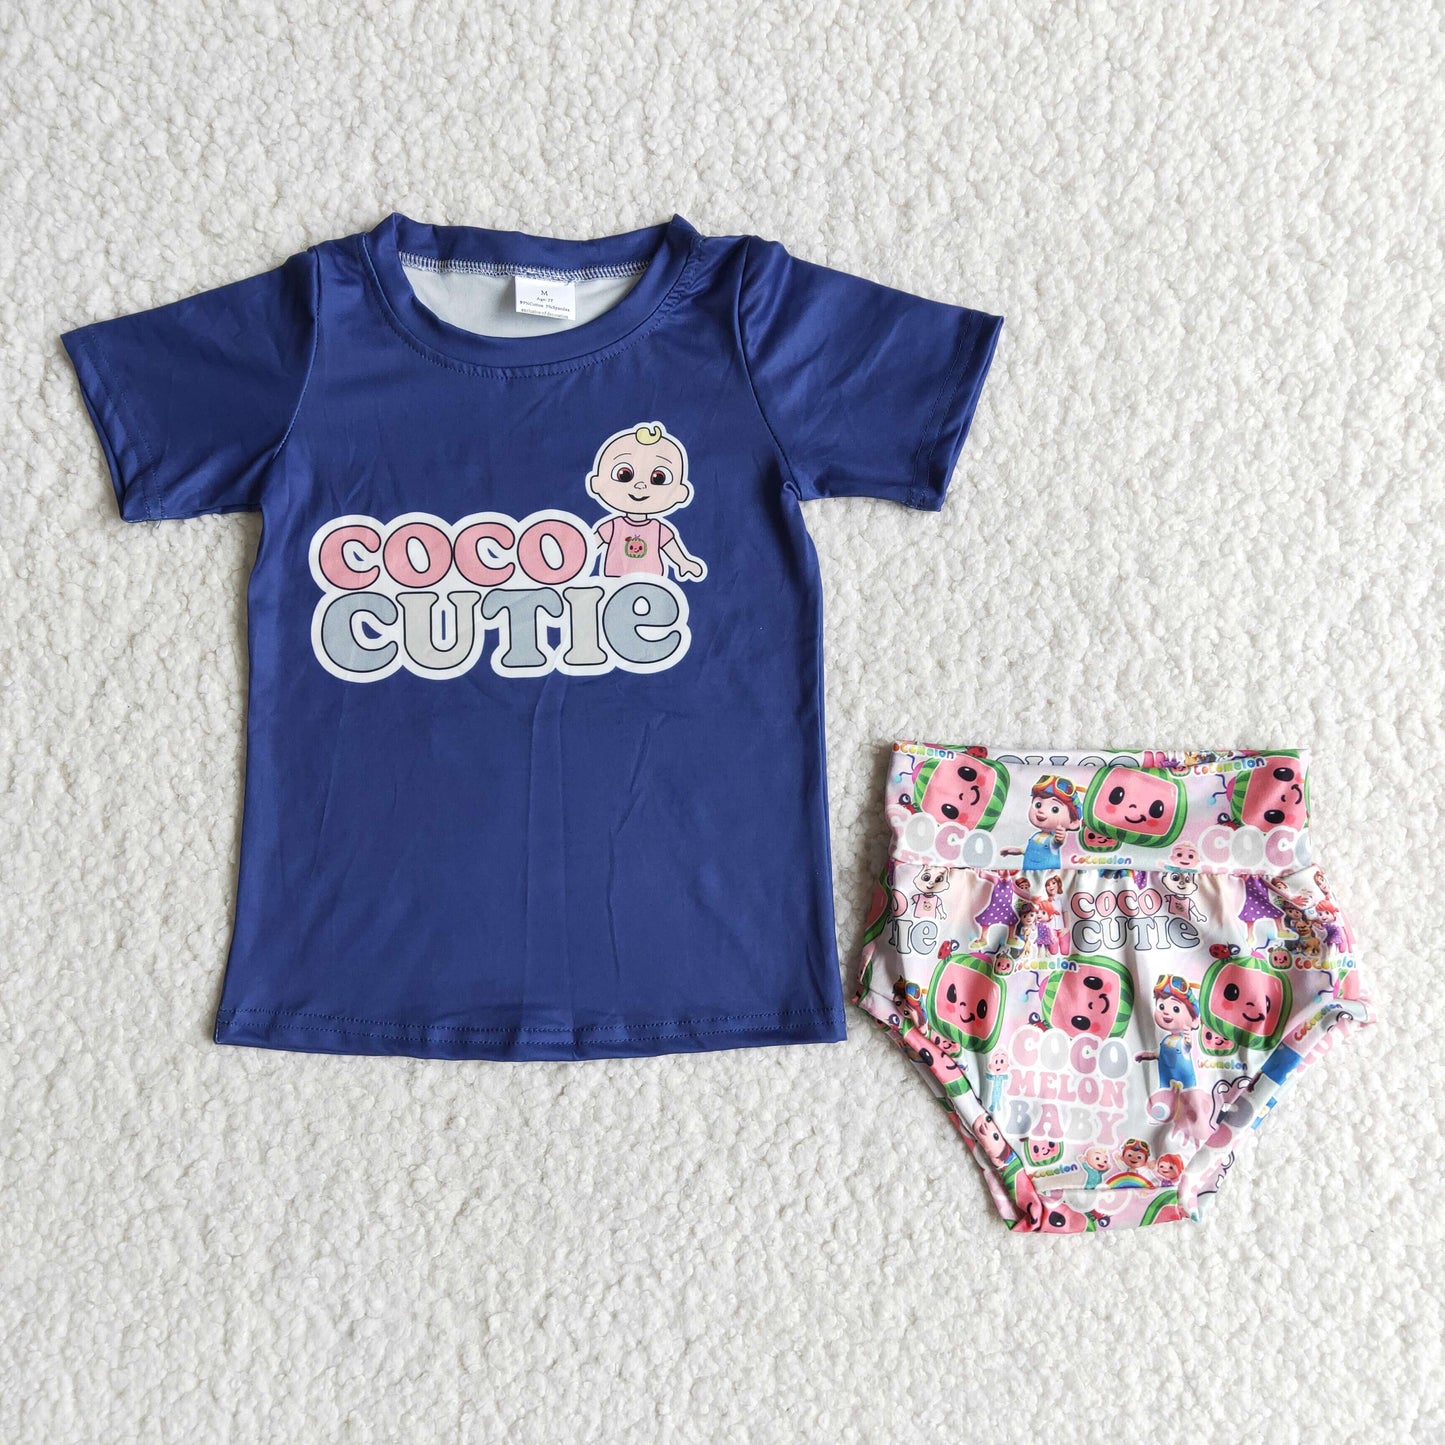 coco baby cute girl clothes